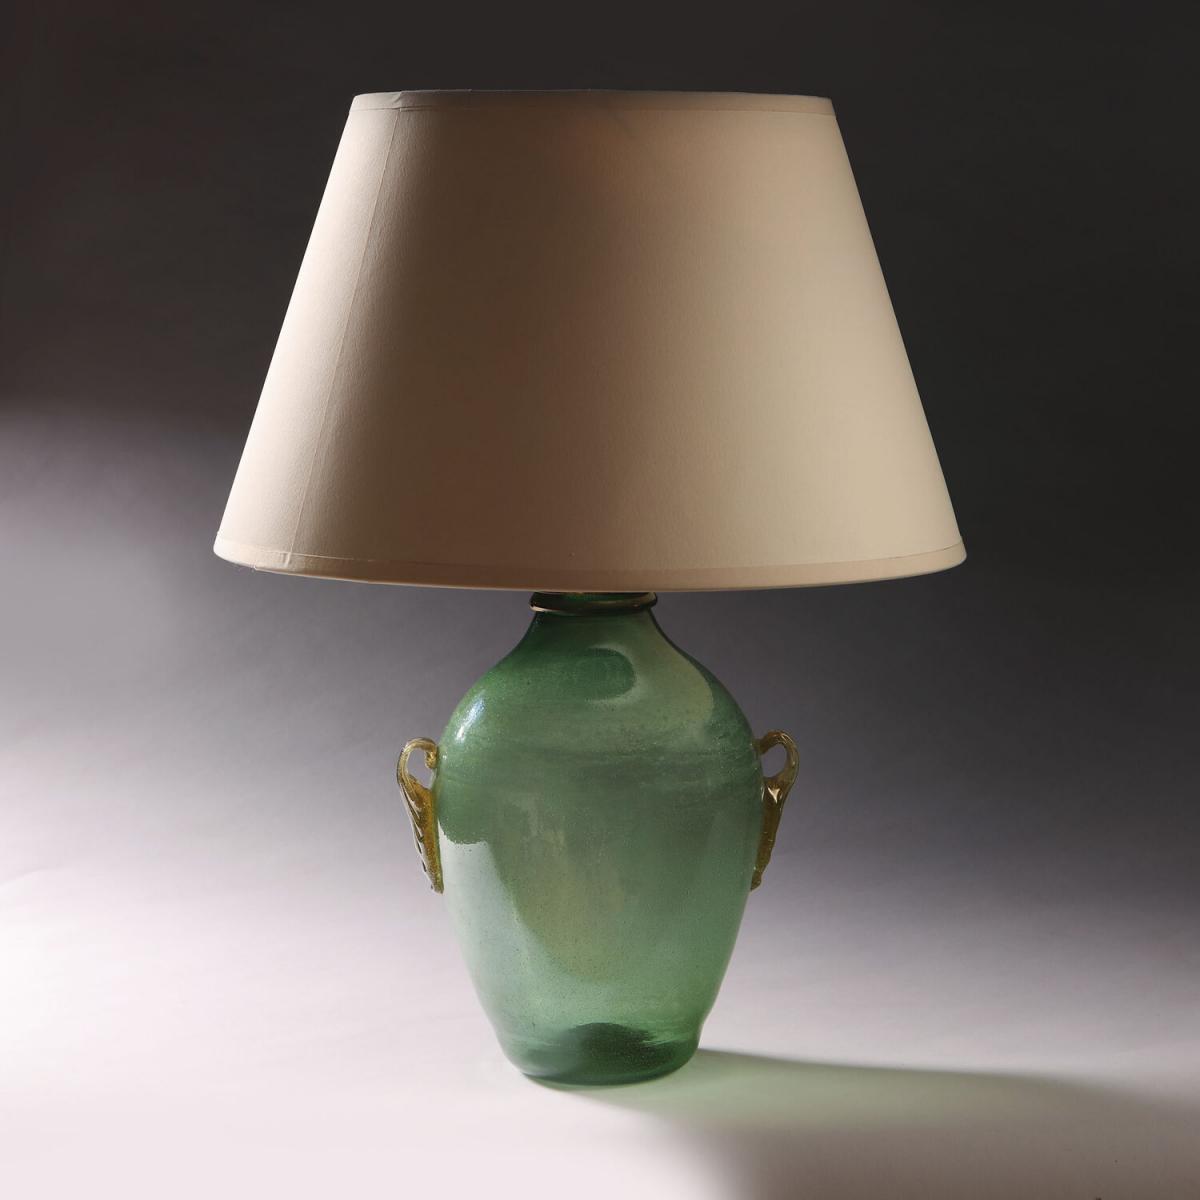 A Midcentury Green Murano Glass Vase as a Lamp